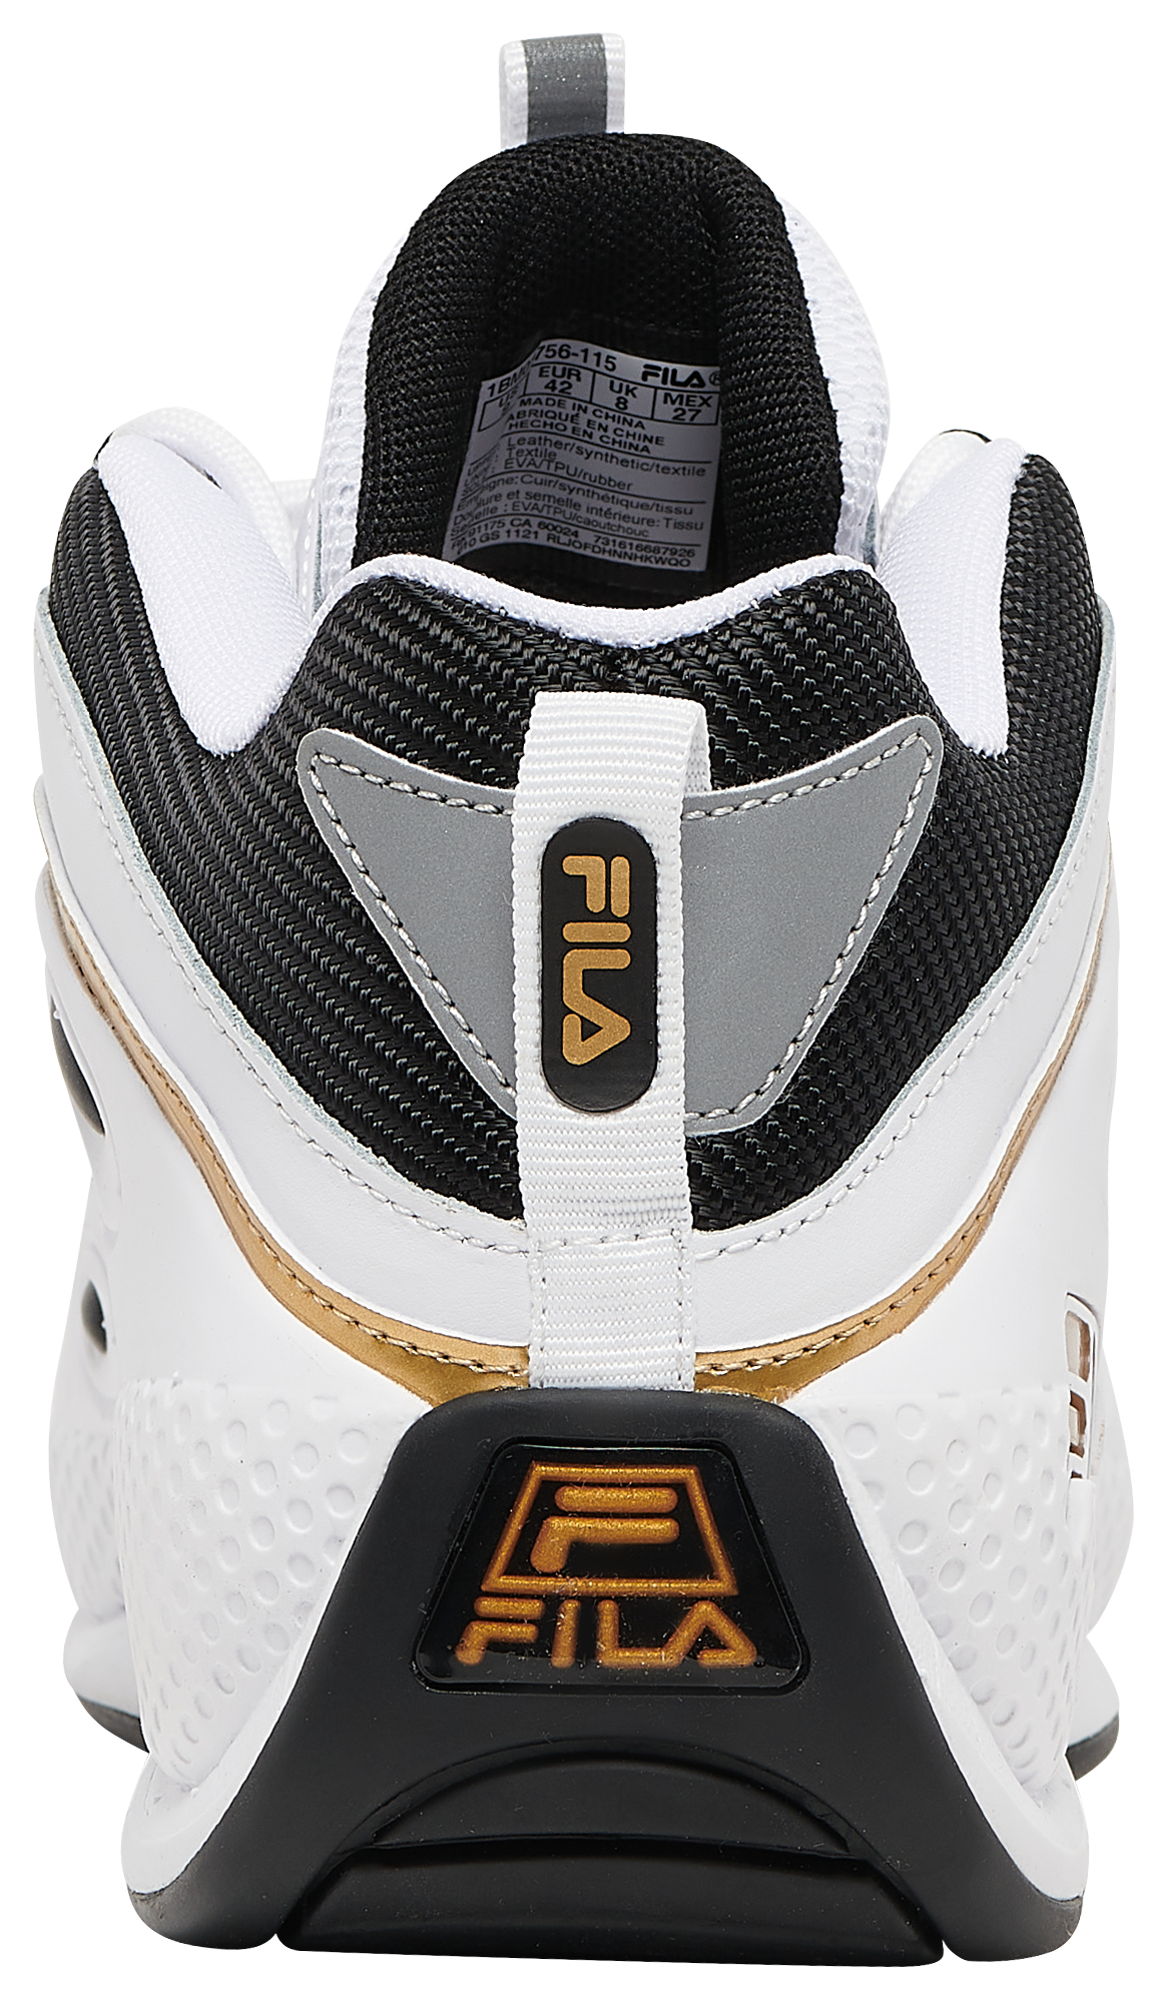 FILA on X: Keep it cool 🧊! Check out the all new Grant Hill 3